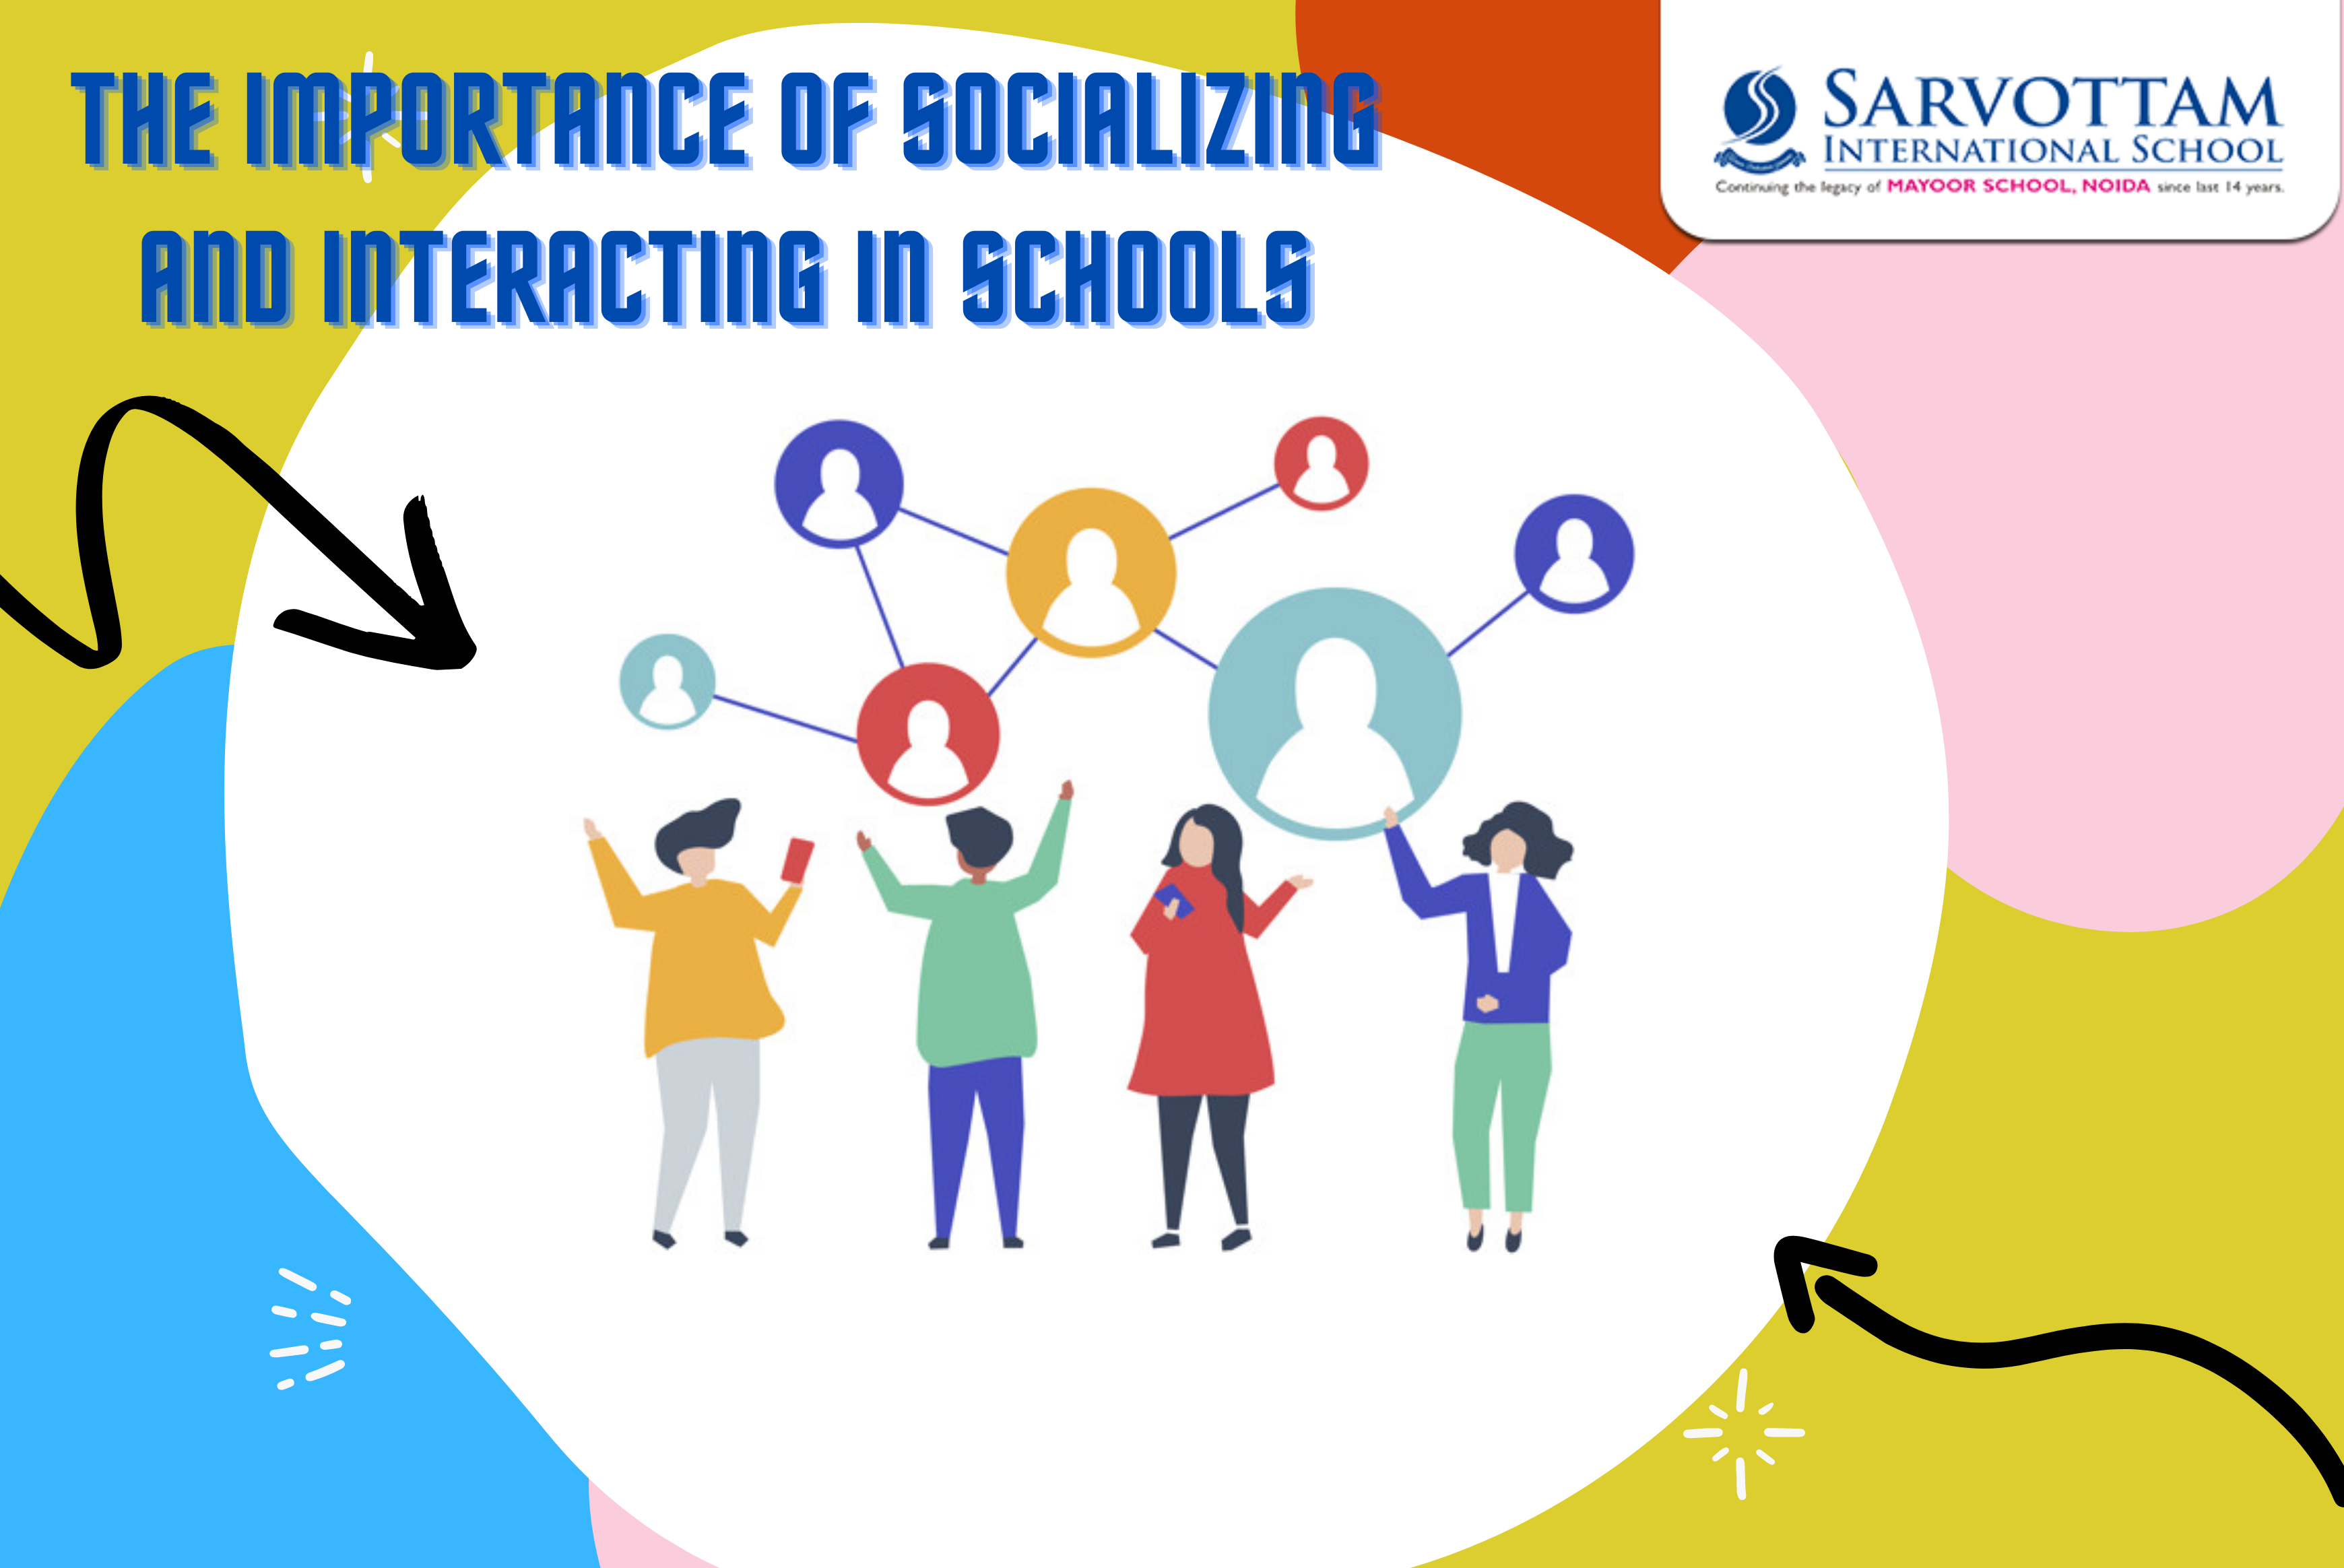 The importance of socializing and interacting in schools